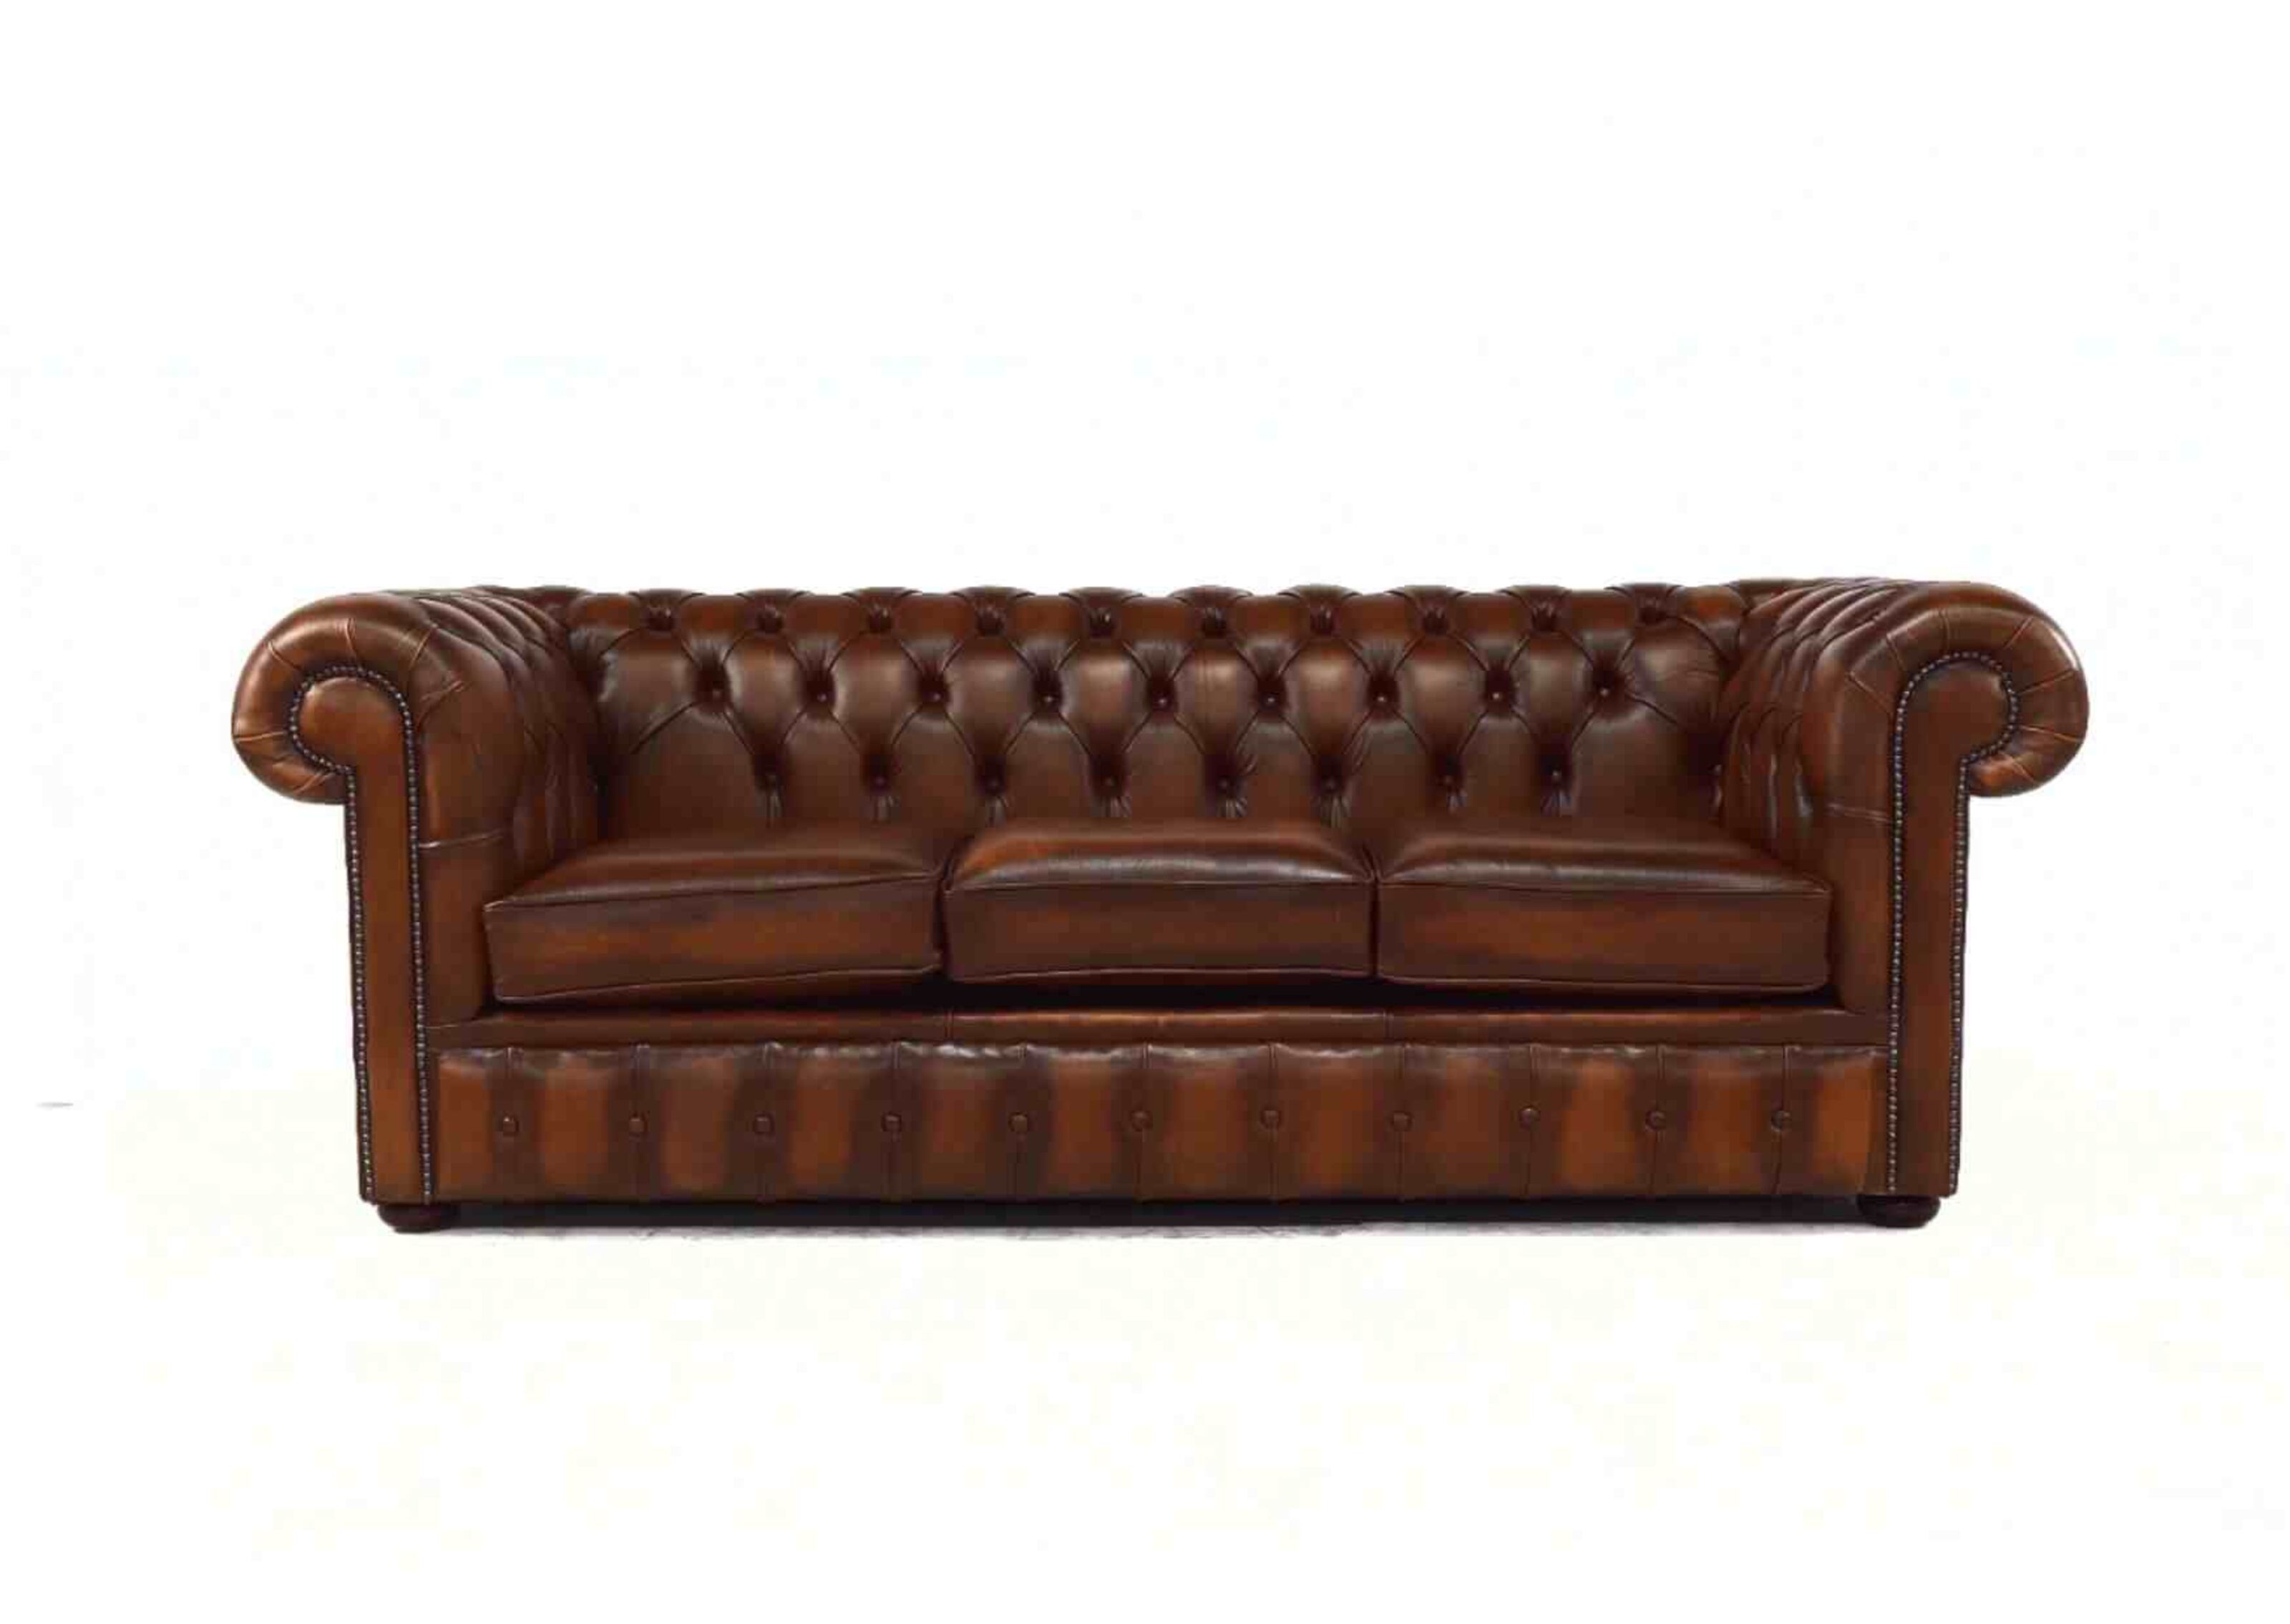 Timeless Elegance The Allure of Antique Chesterfield Sofas  %Post Title